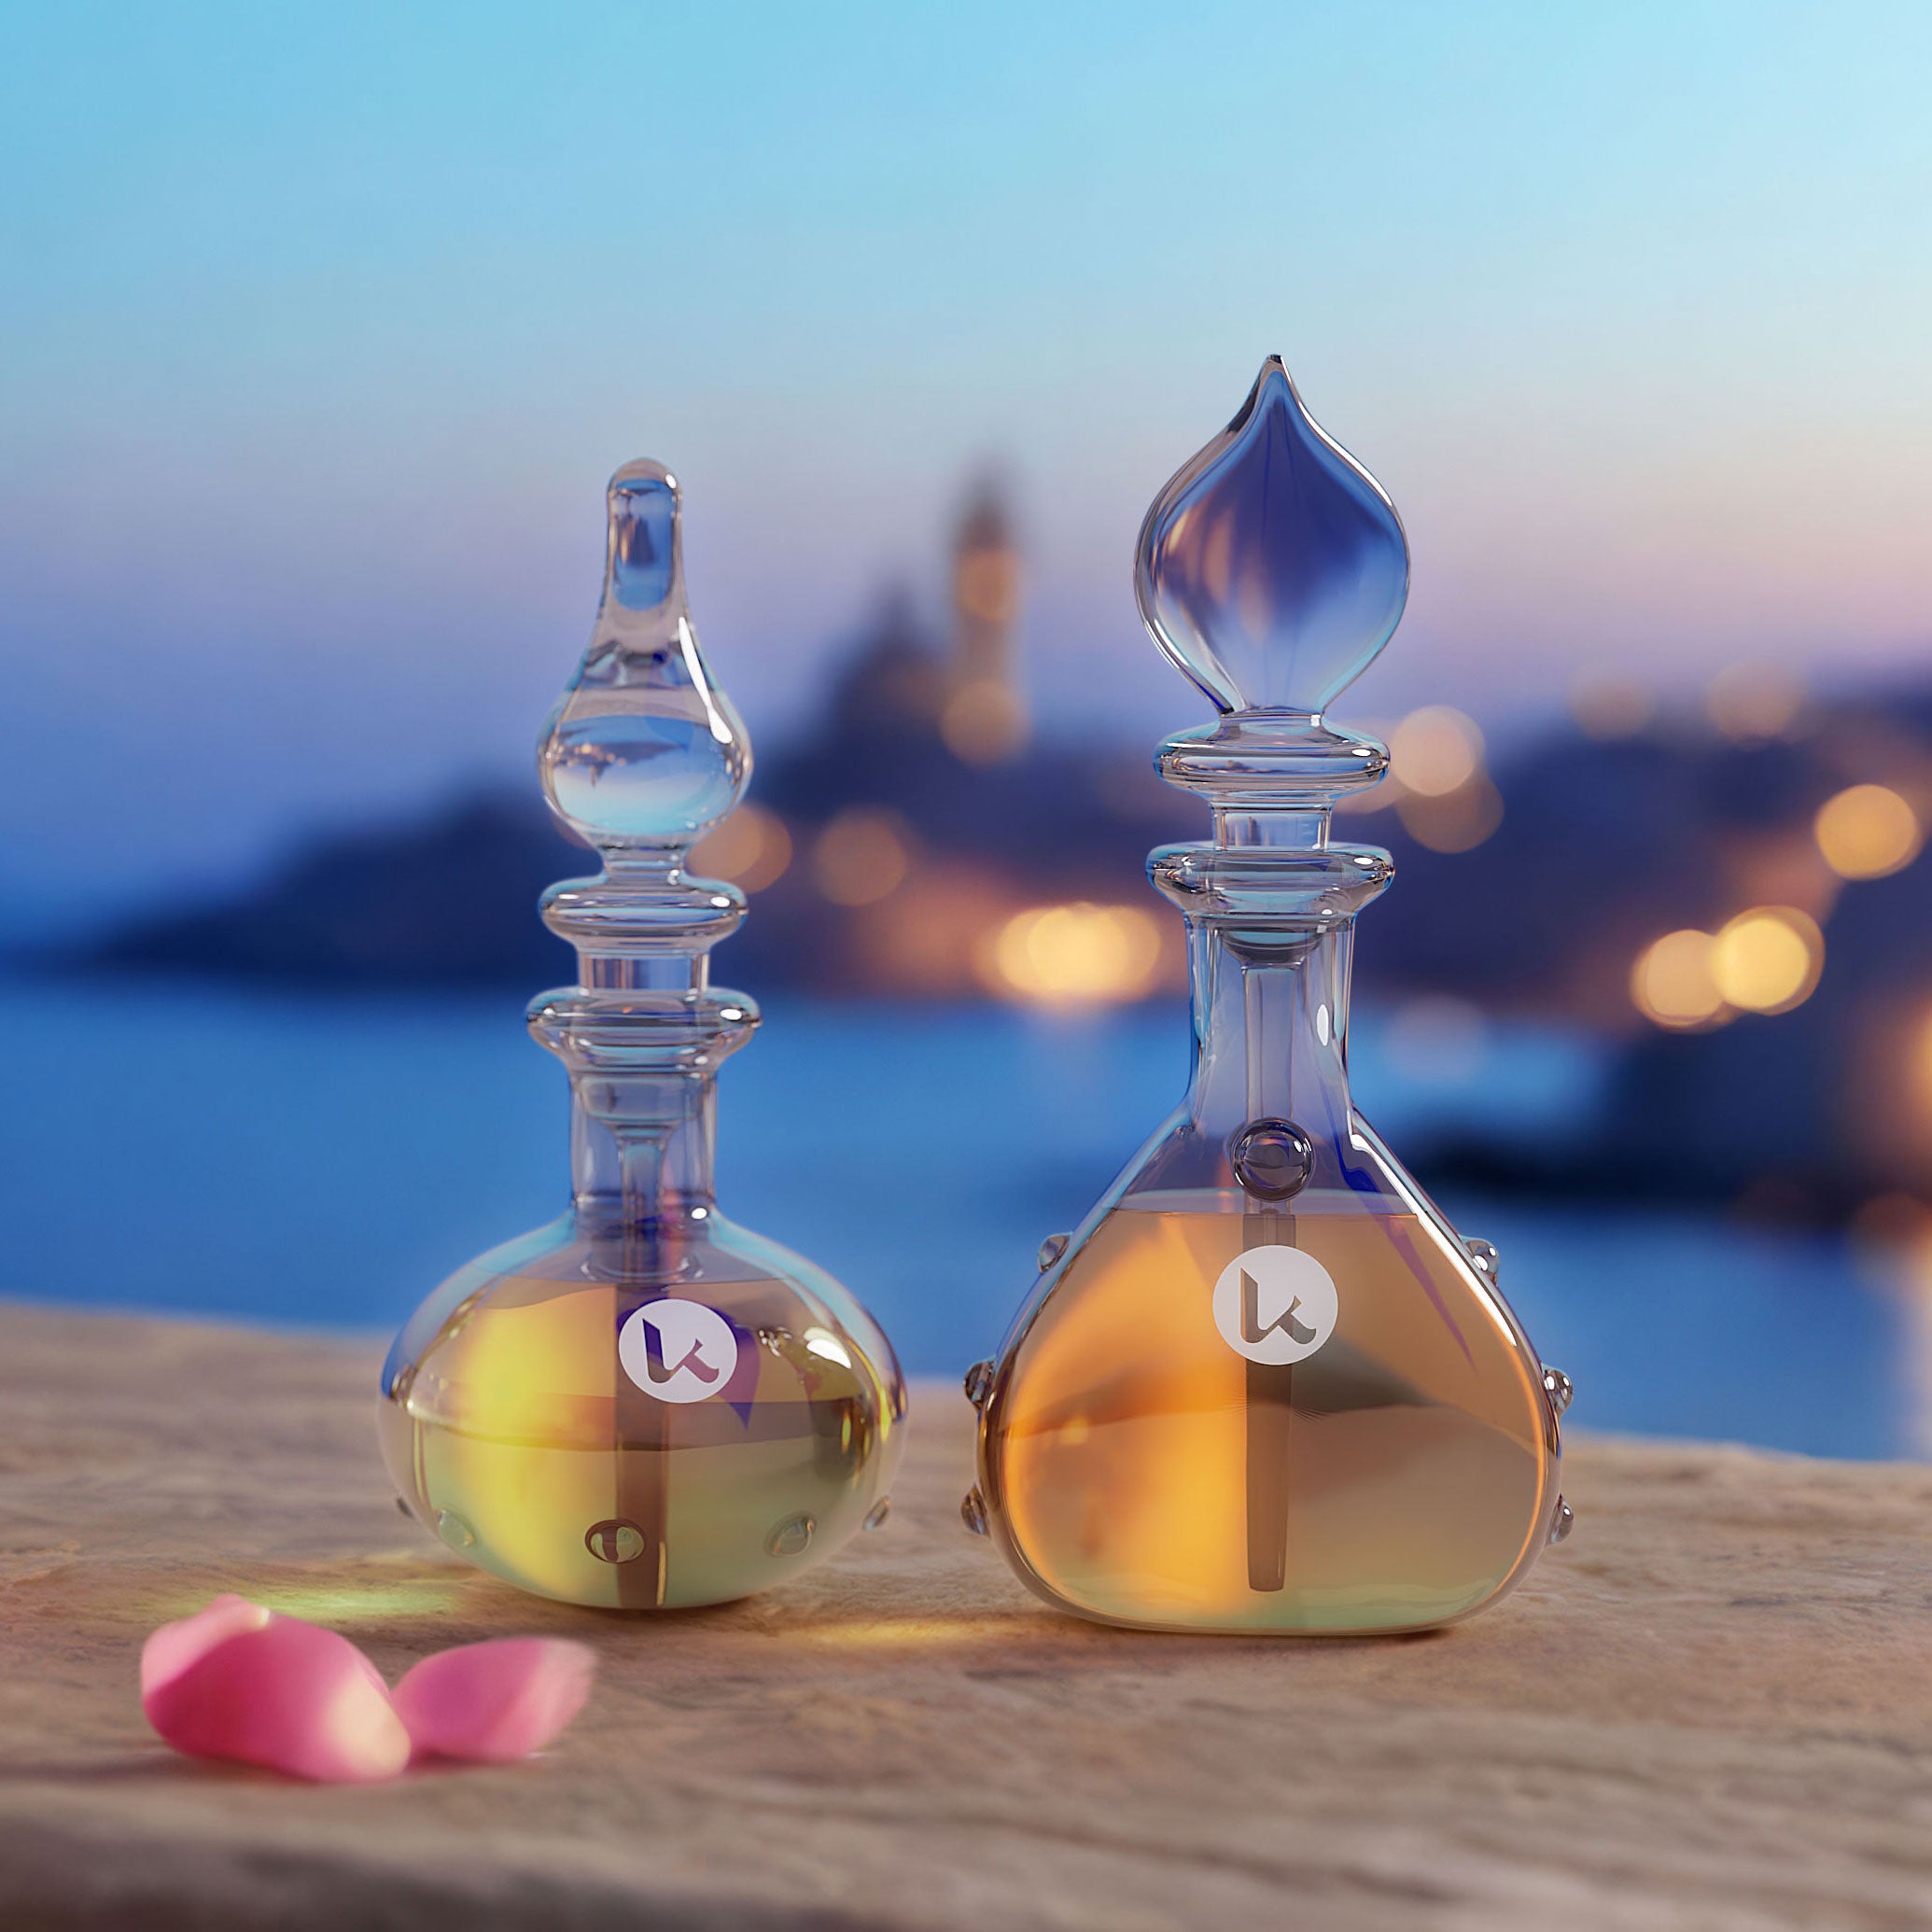 Katari Perfume Oil (alcohol-free blend of essential oils from France)